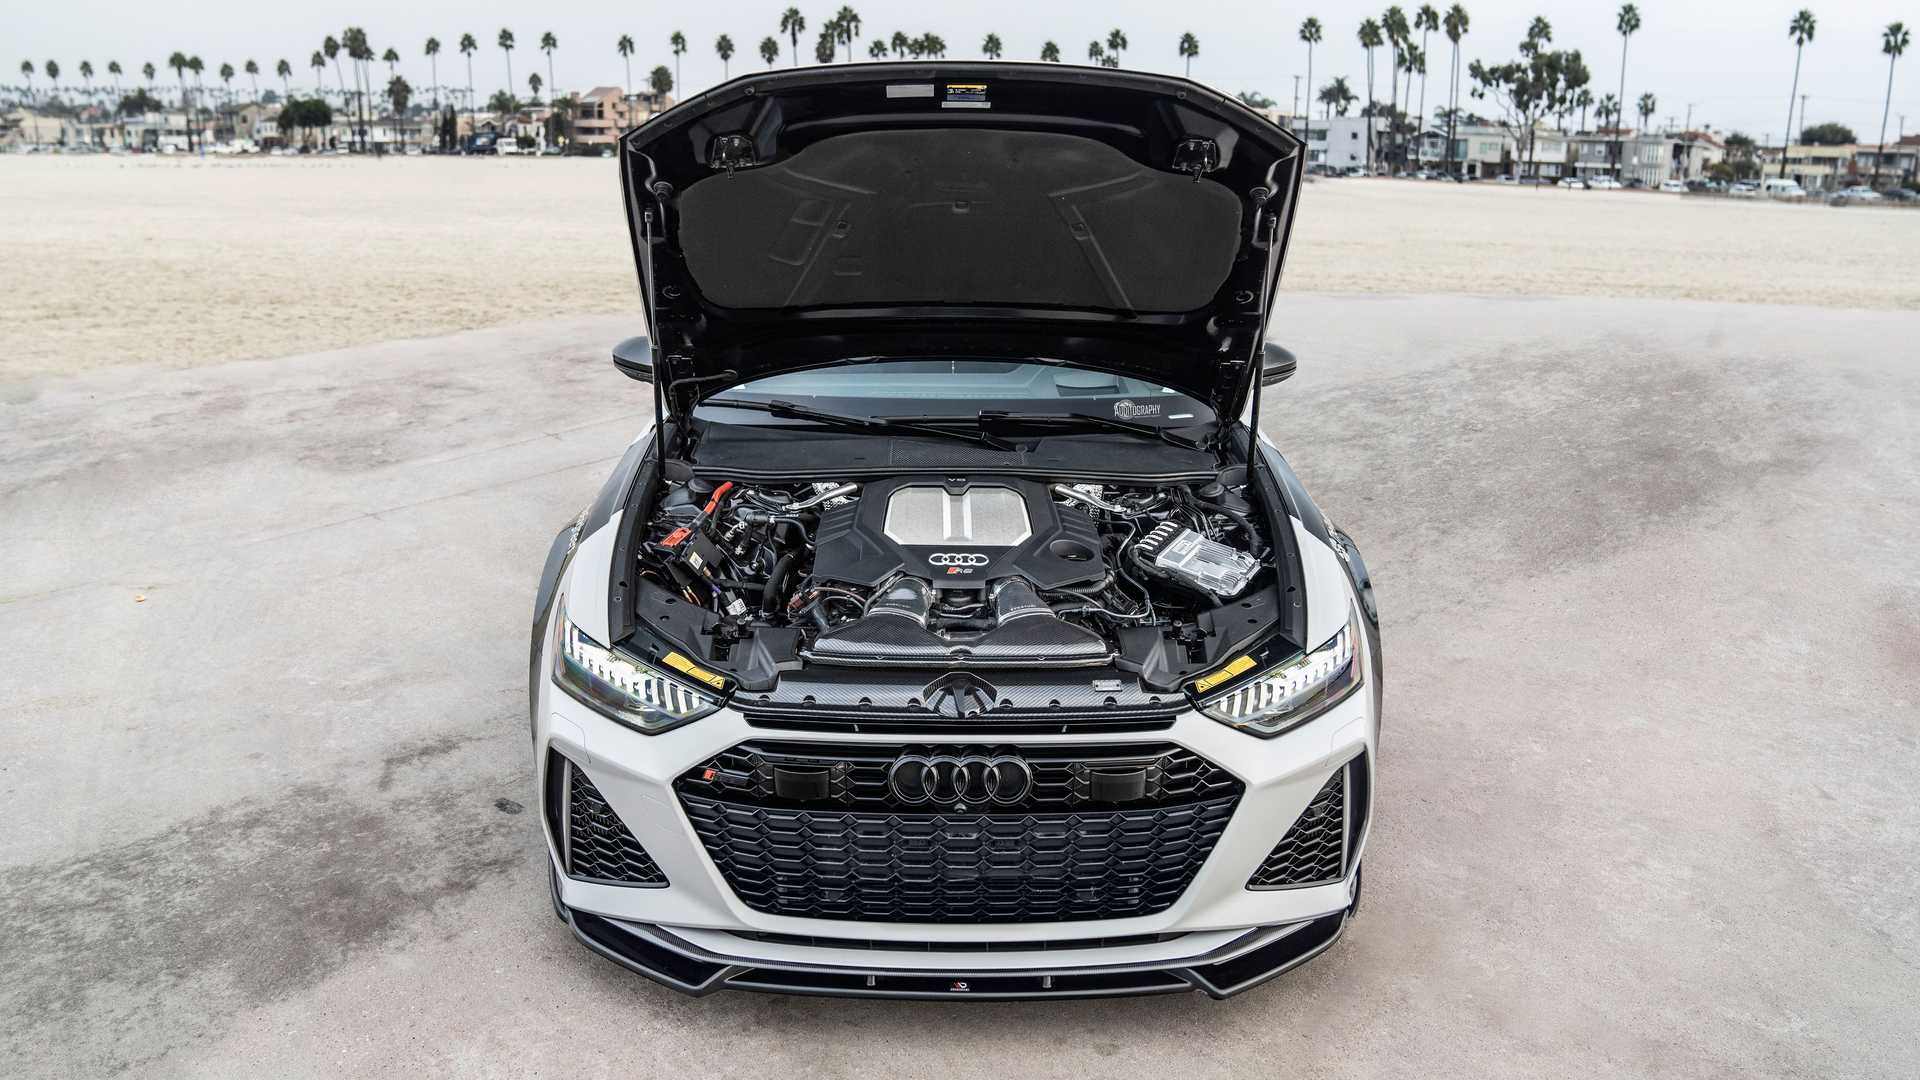 You will dream of this Audi RS 6 Avant with more than 1,000 hp